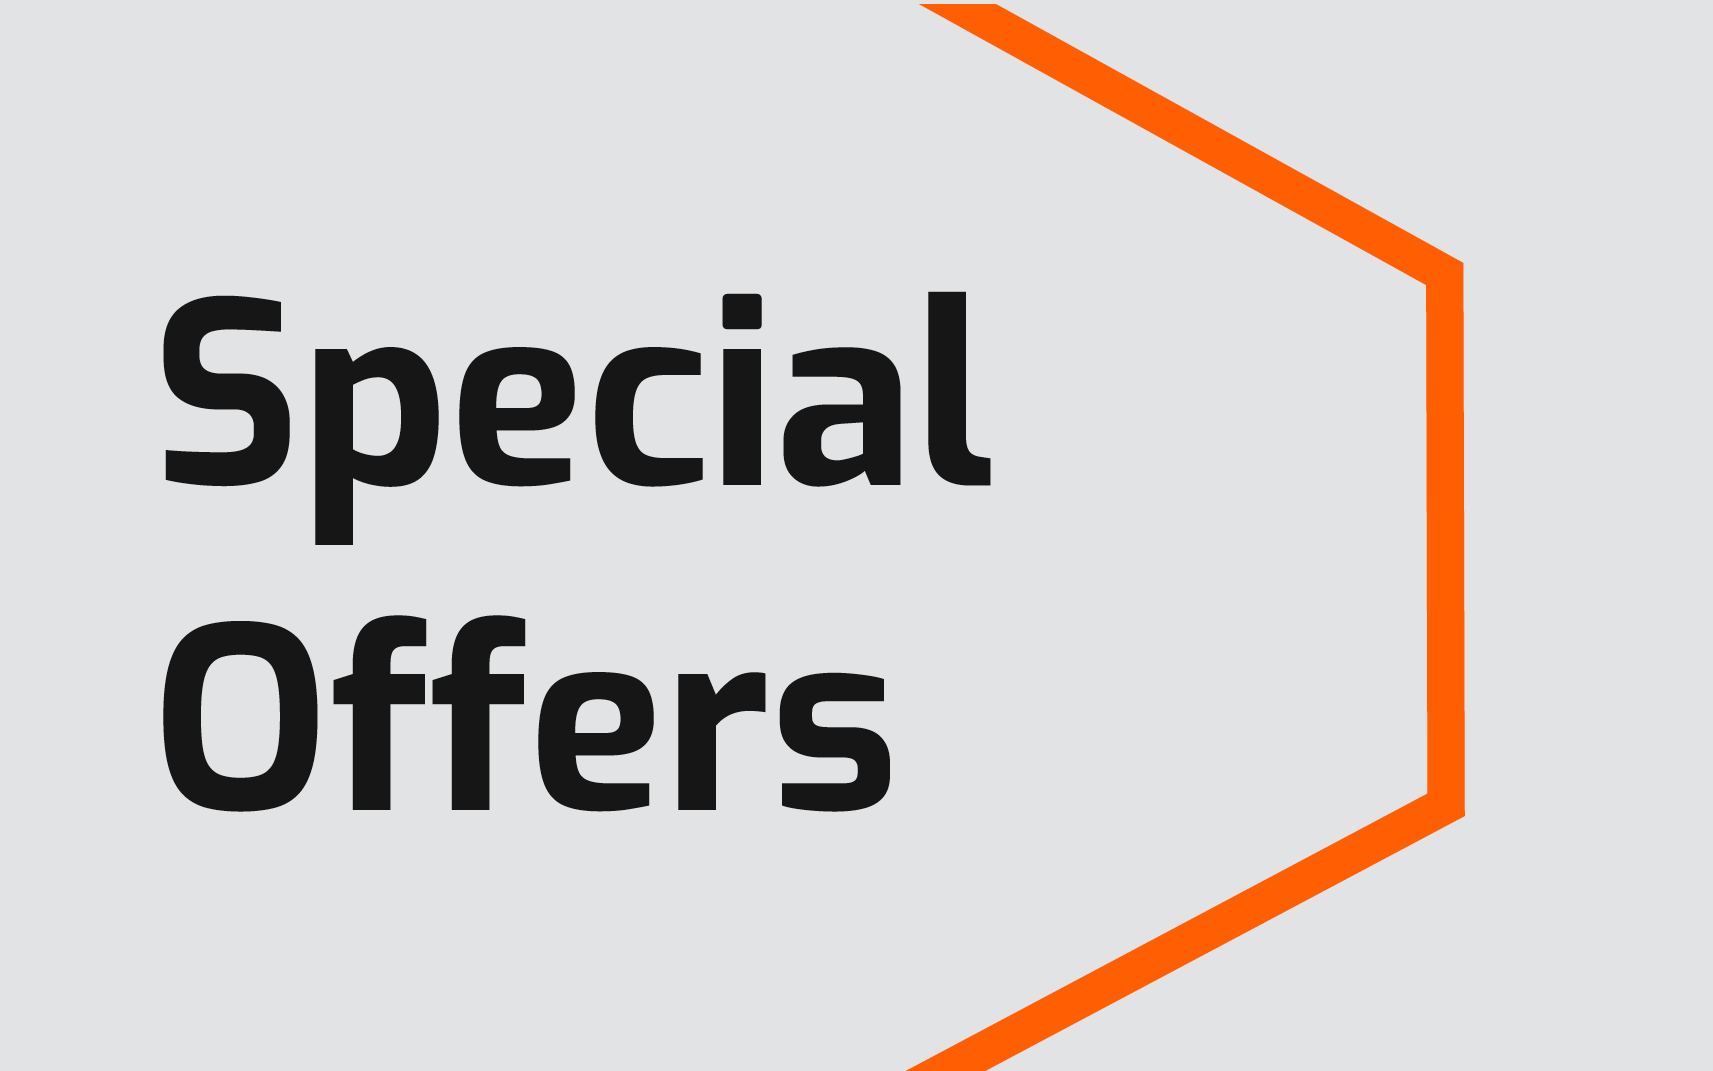 Special offers graphic with orange Onward arrow.